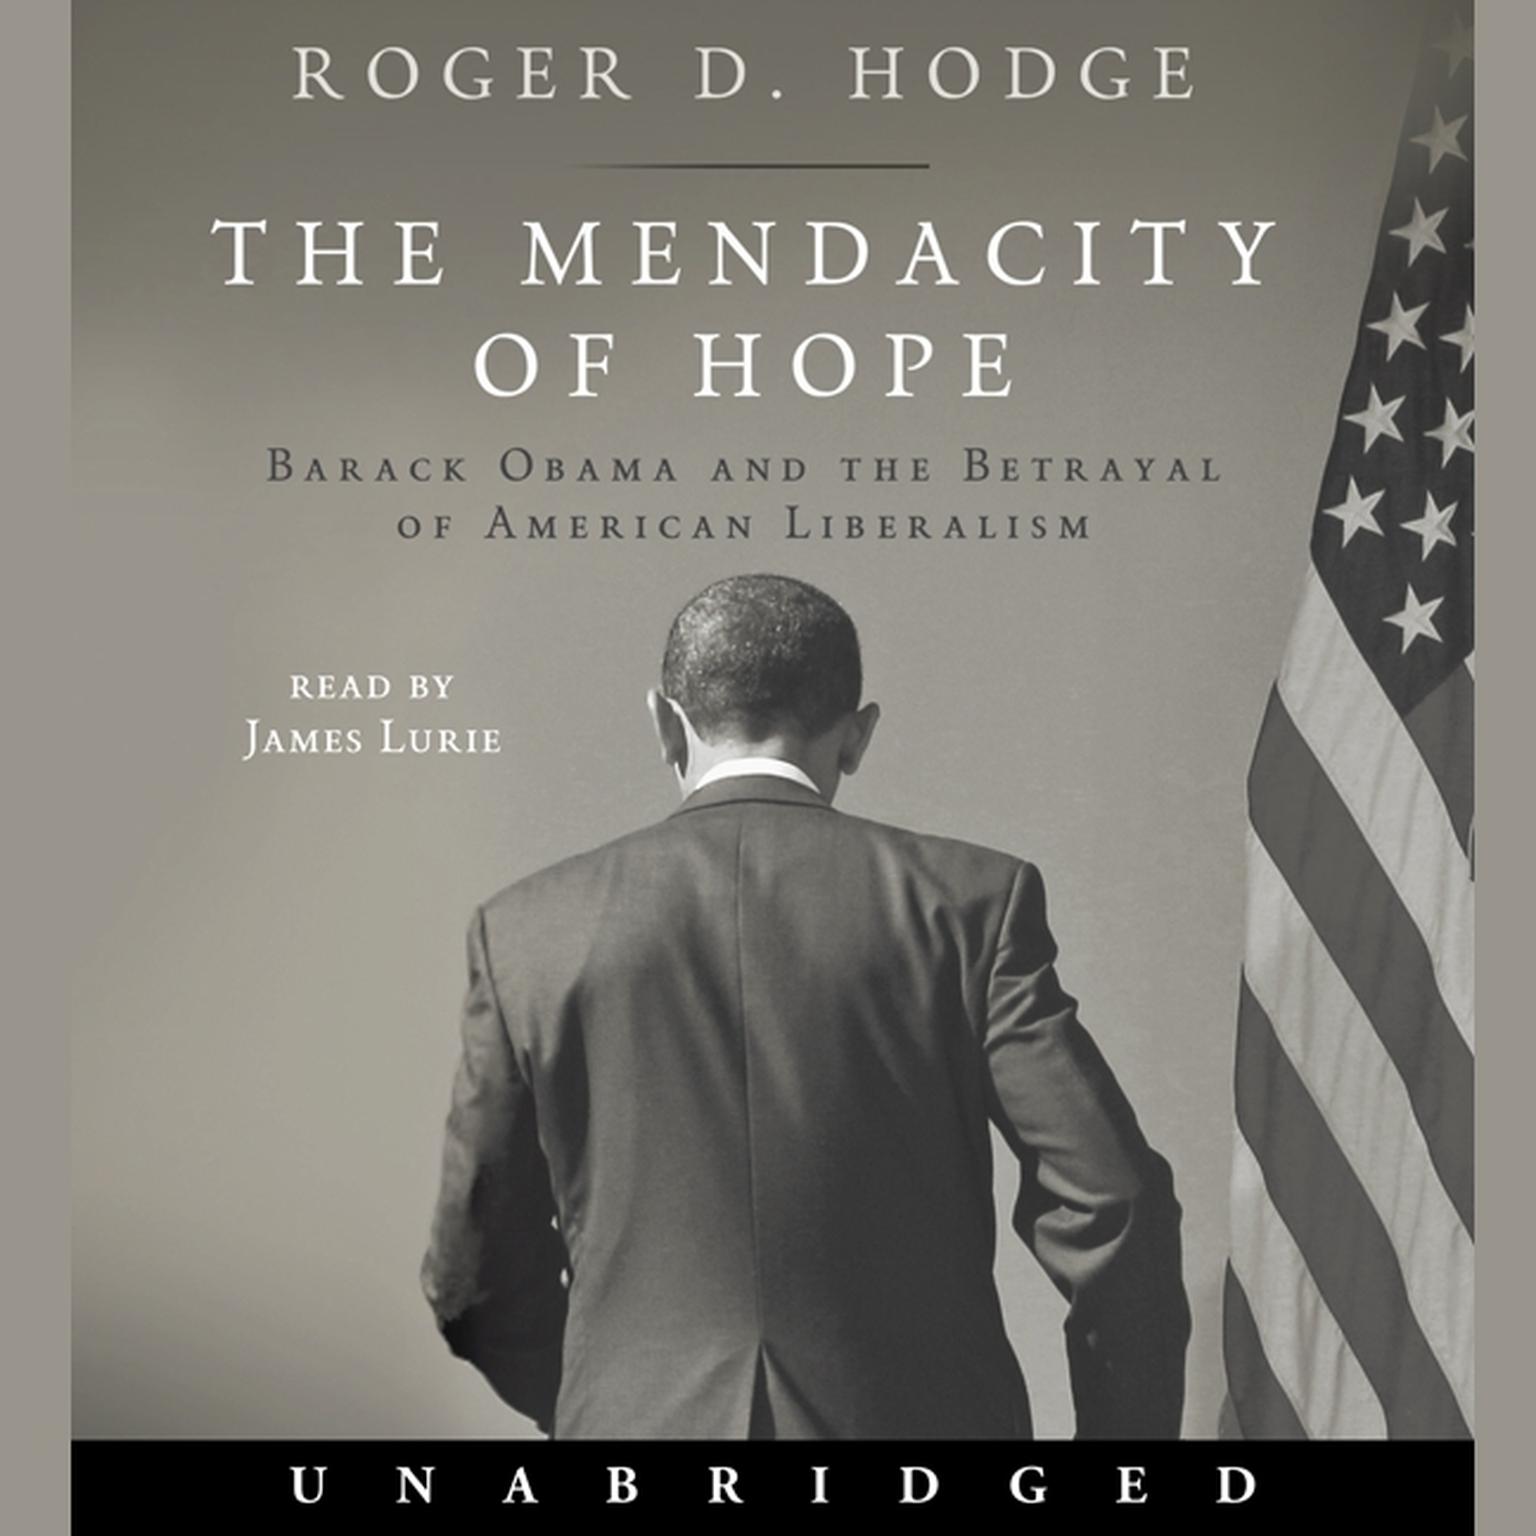 The Mendacity of Hope: Barack Obama and the Betrayal of American Liberalism Audiobook, by Roger D. Hodge